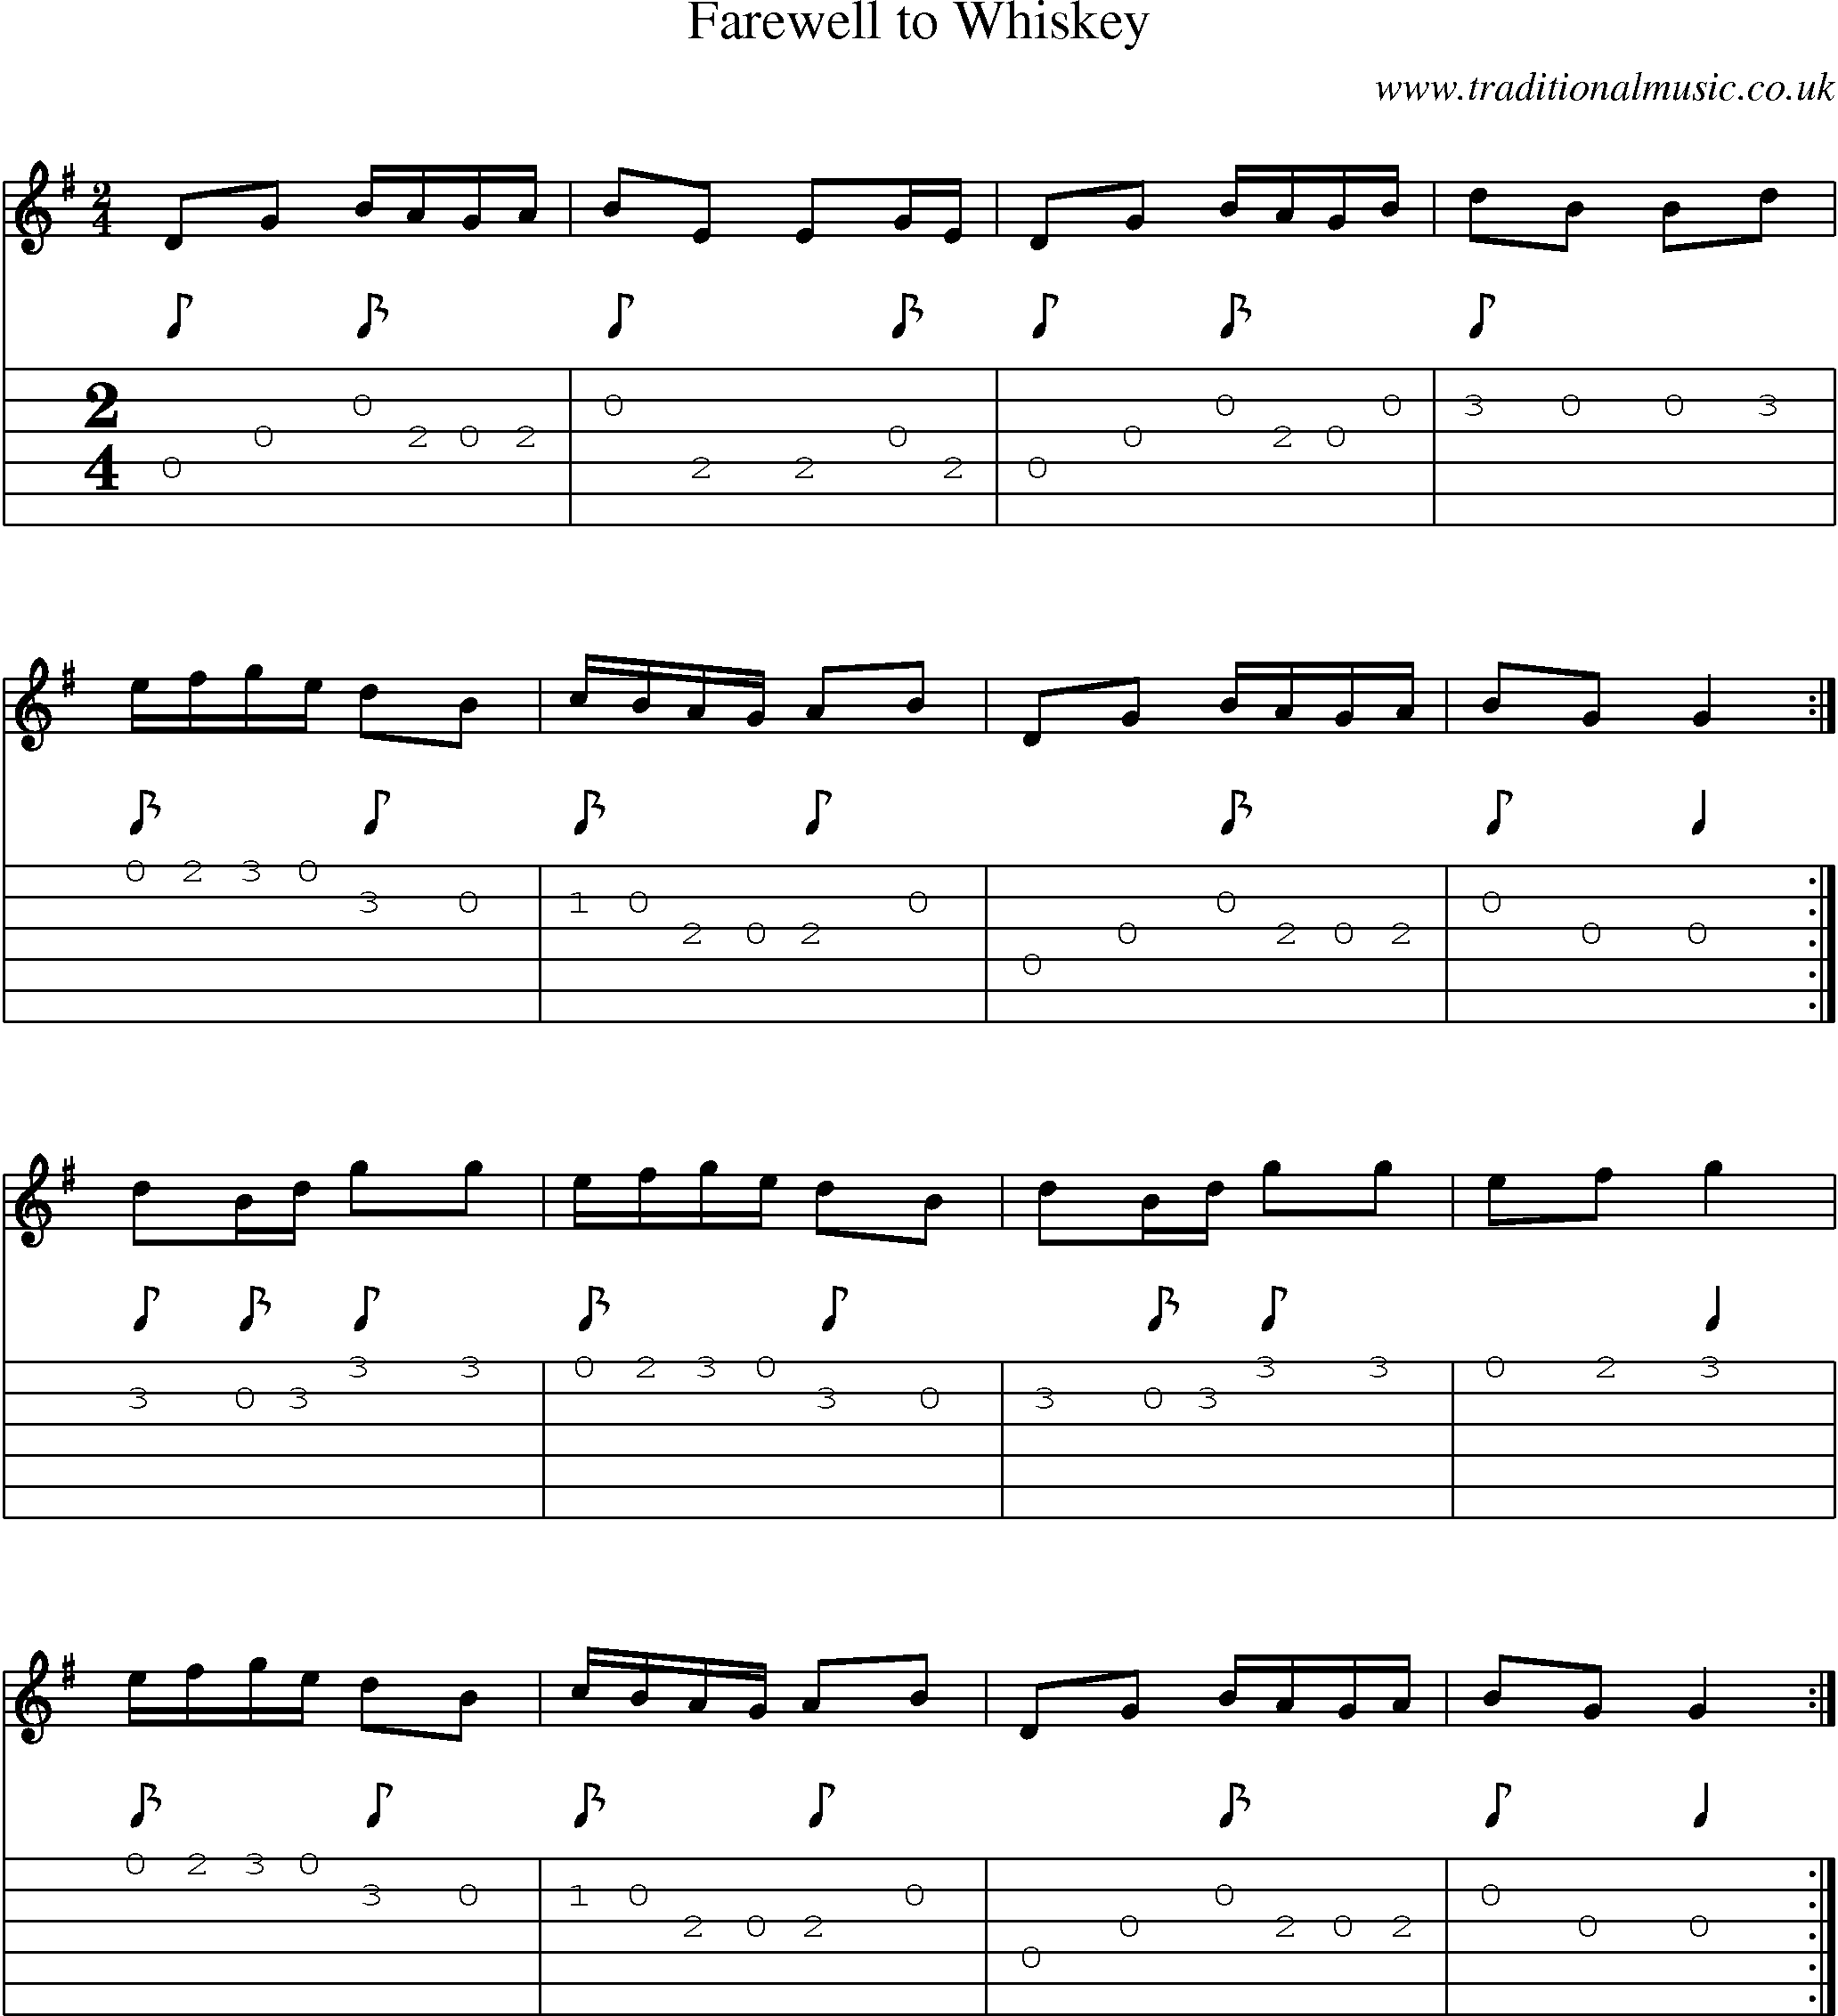 Music Score and Guitar Tabs for Farewell To Whiskey